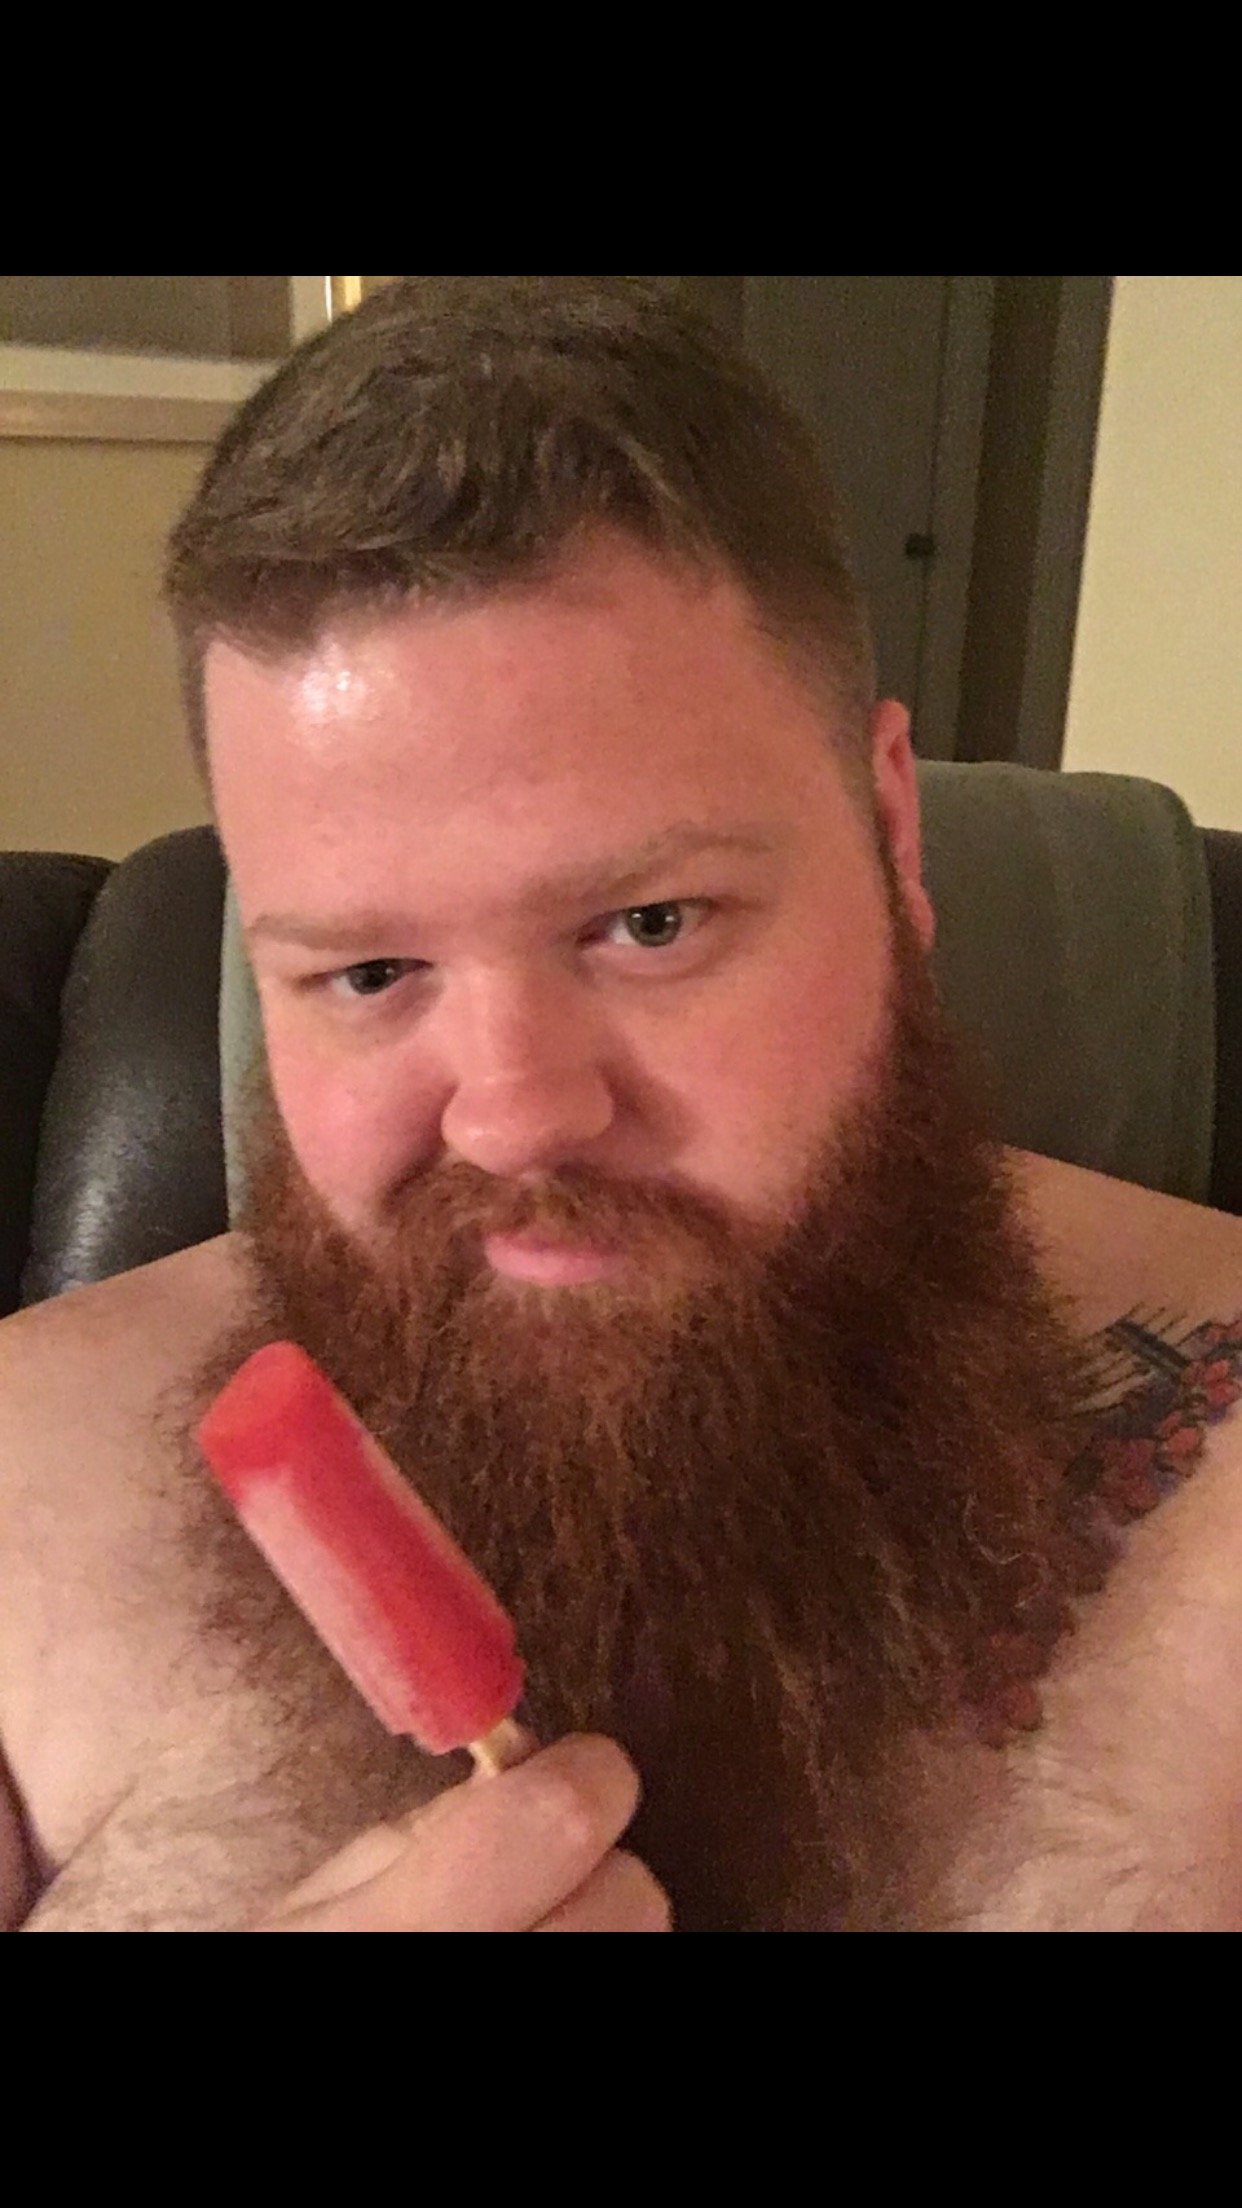 Just a bird with a beard, and a fat ass popsicle